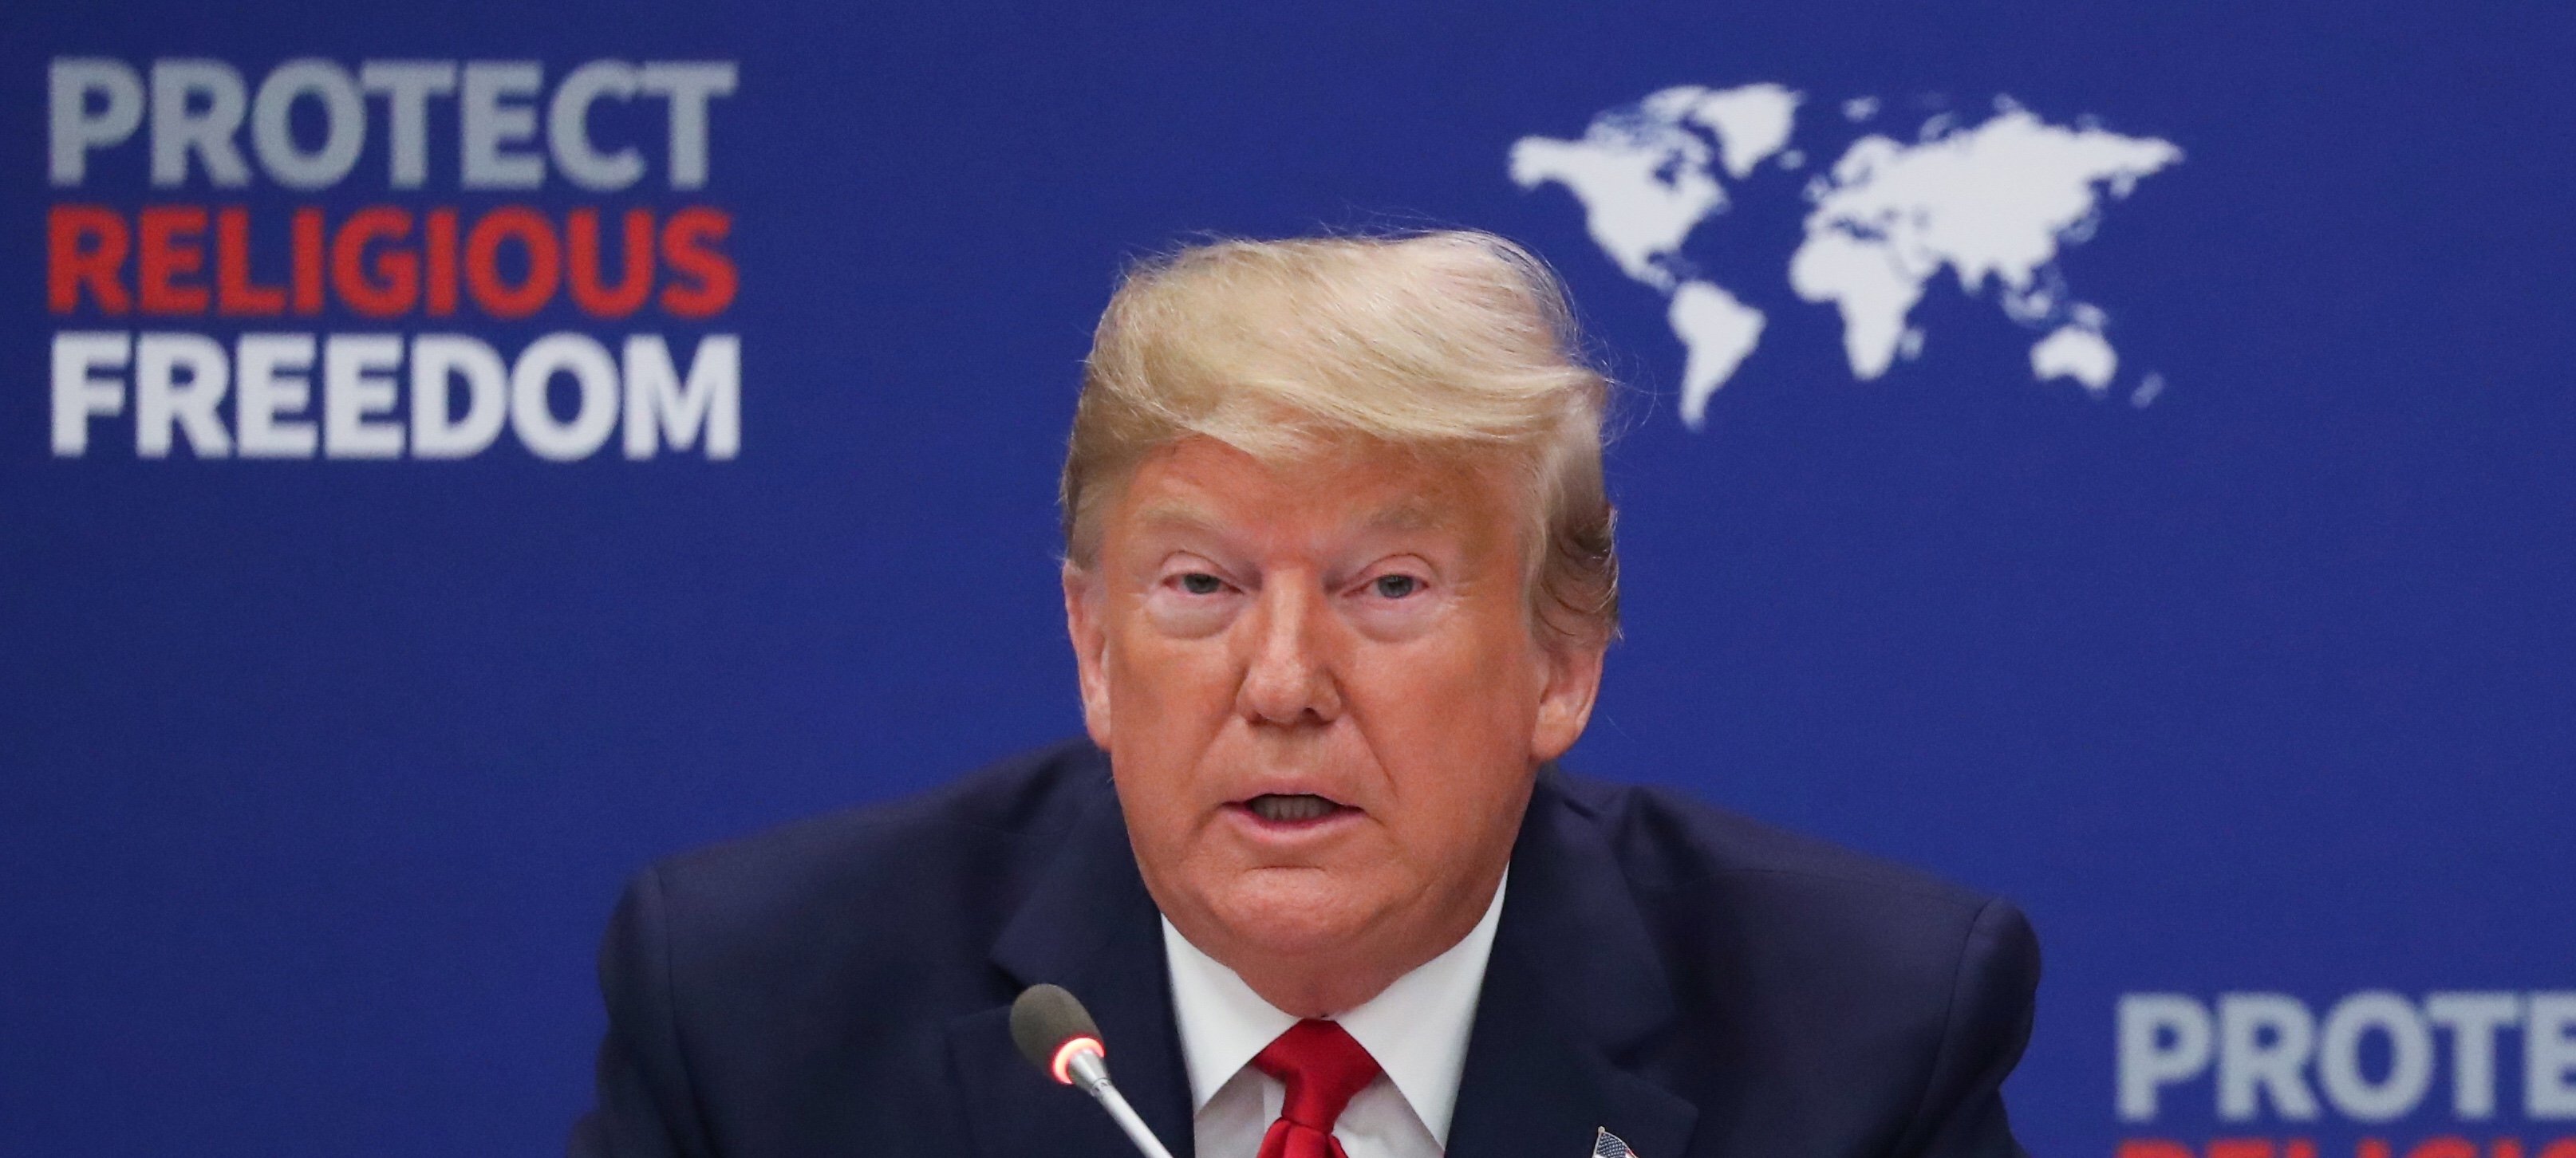 U.S. President Donald Trump delivers remarks at the "Global Call to Protect Religious Freedom" event at U.N. headquarters in New York City, New York, U.S., September 23, 2019. REUTERS/Jonathan Ernst